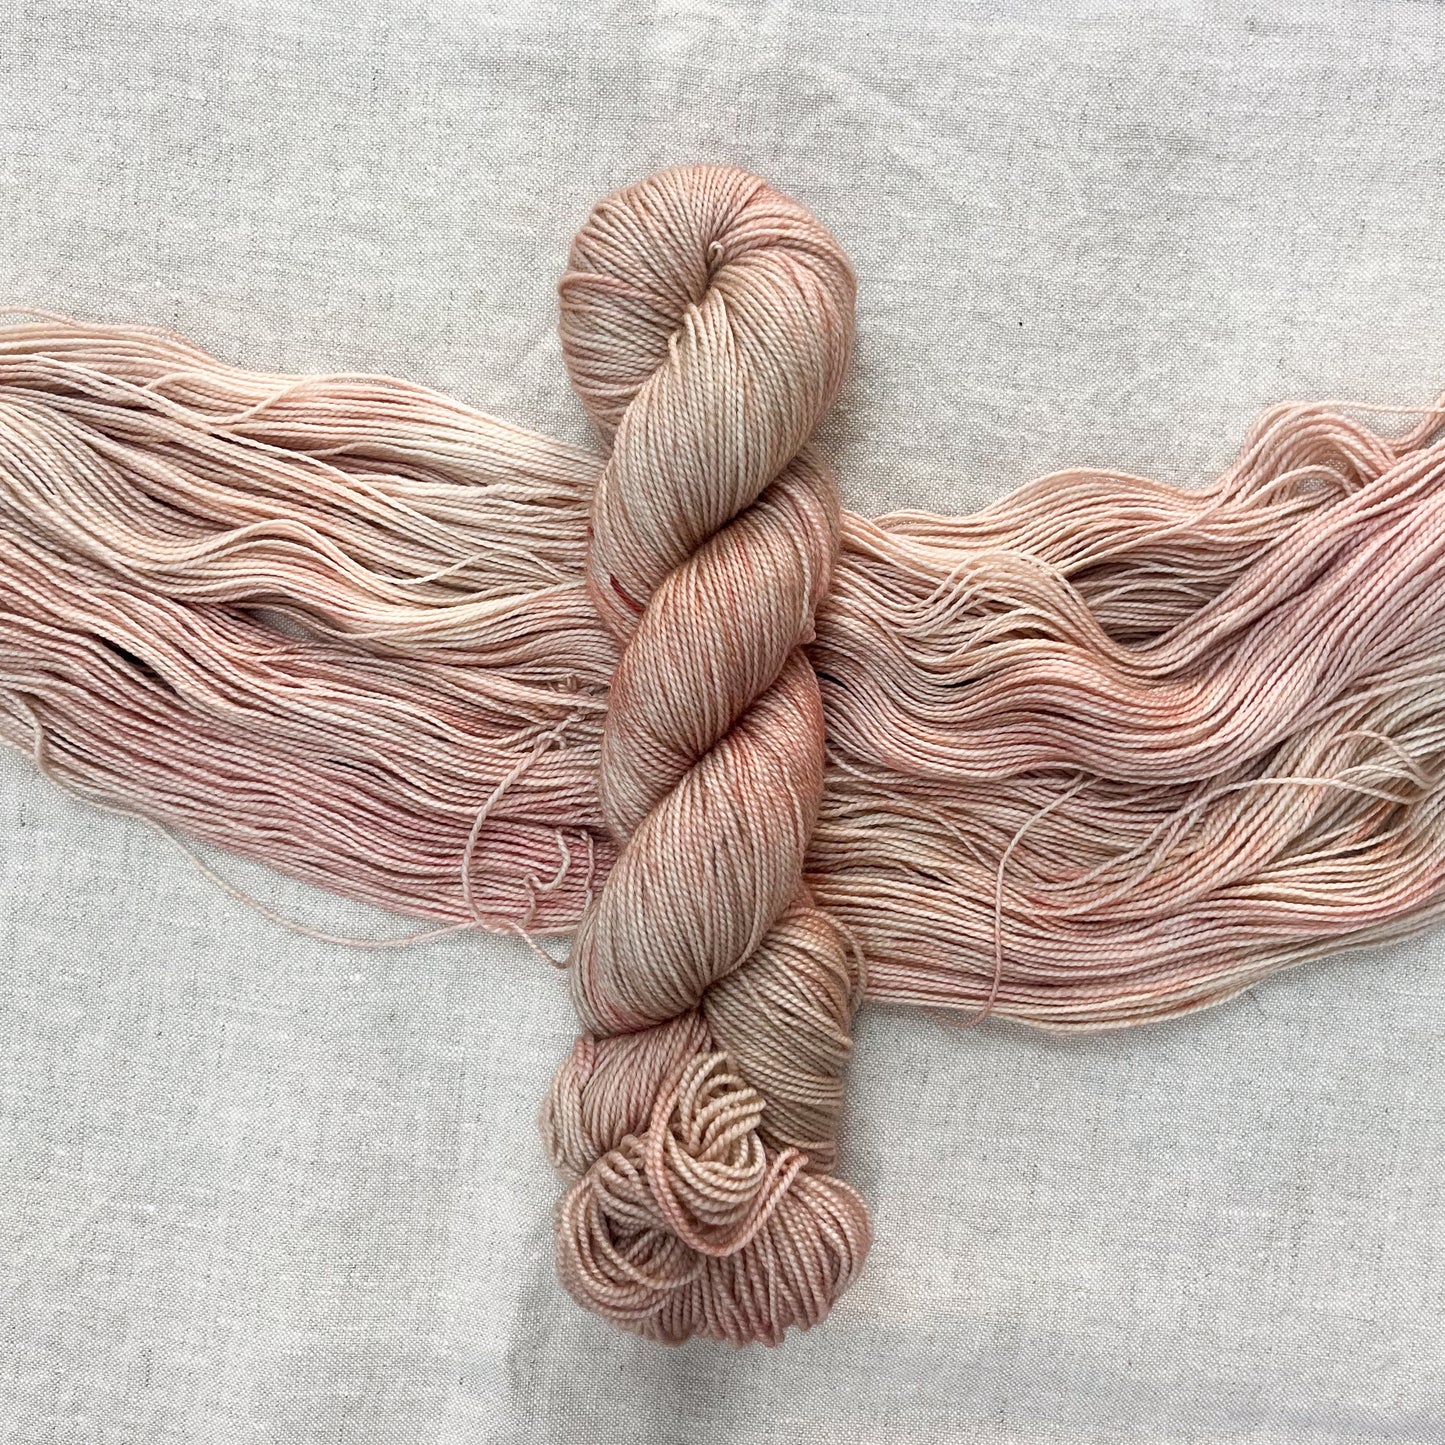 Toil & Trouble Hand Dyed Yarn - Sonnet